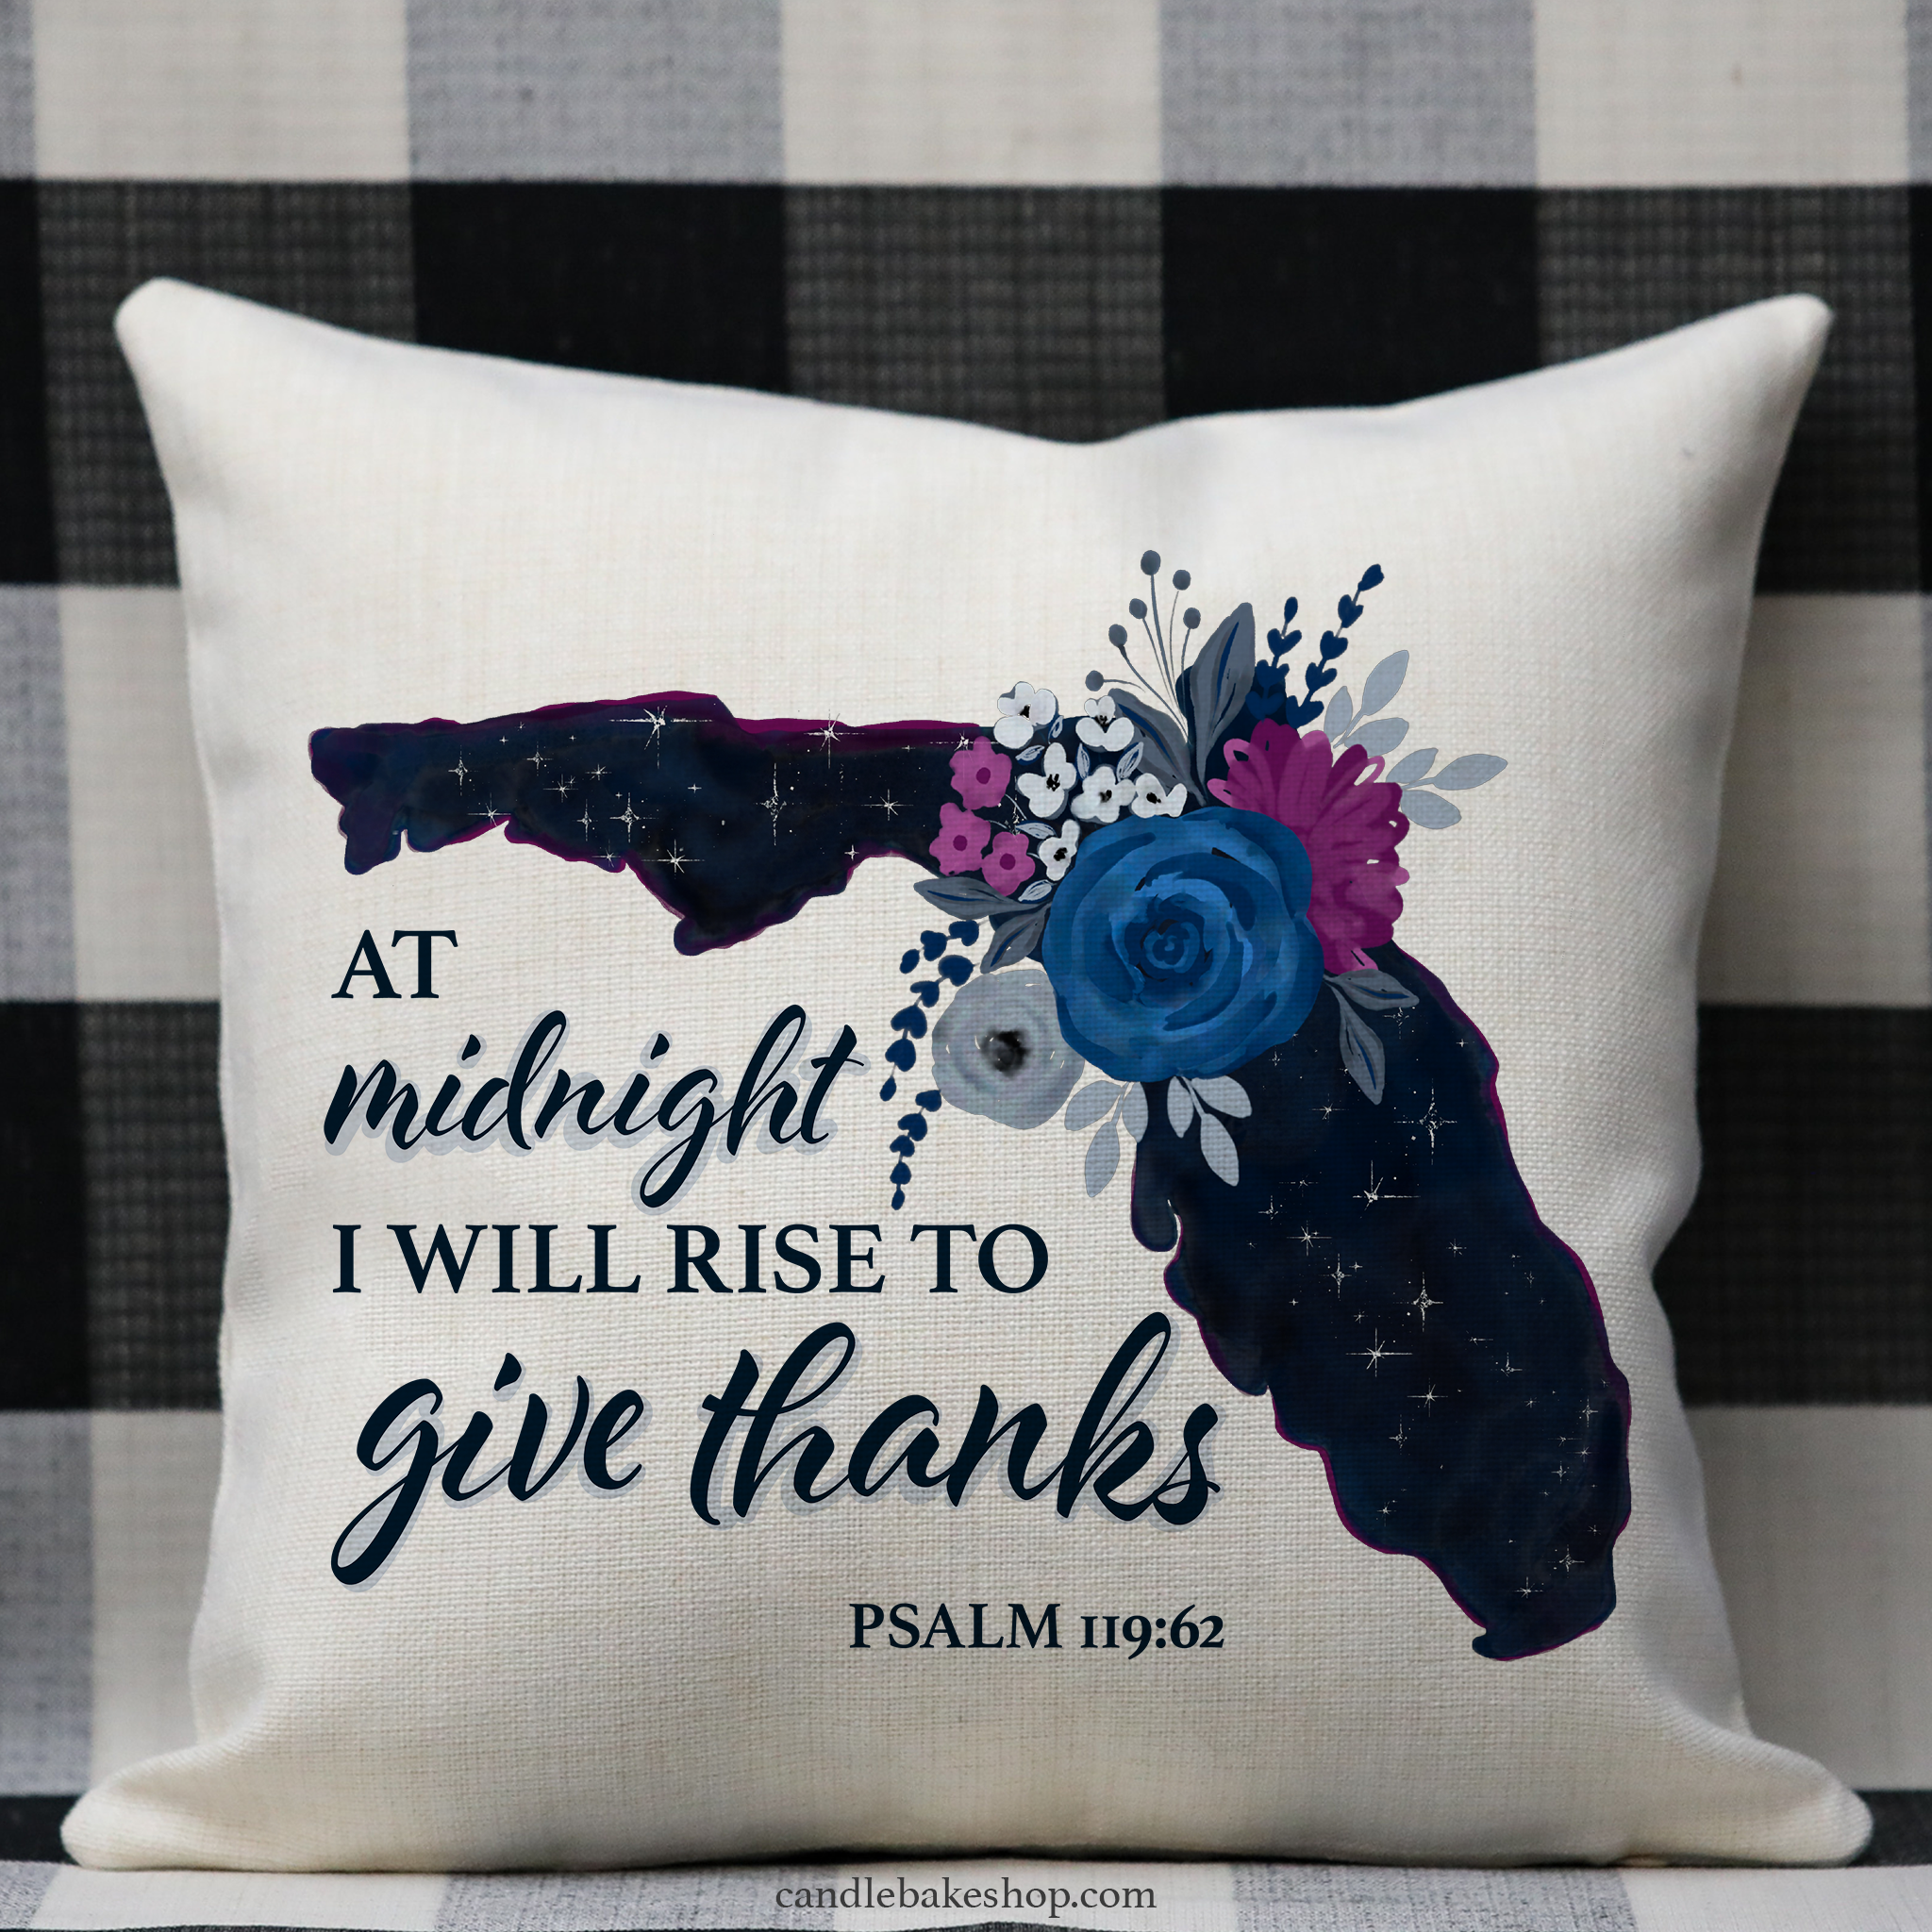 Choose From 50 States - Midnight Sky Bible Verse Throw Pillow